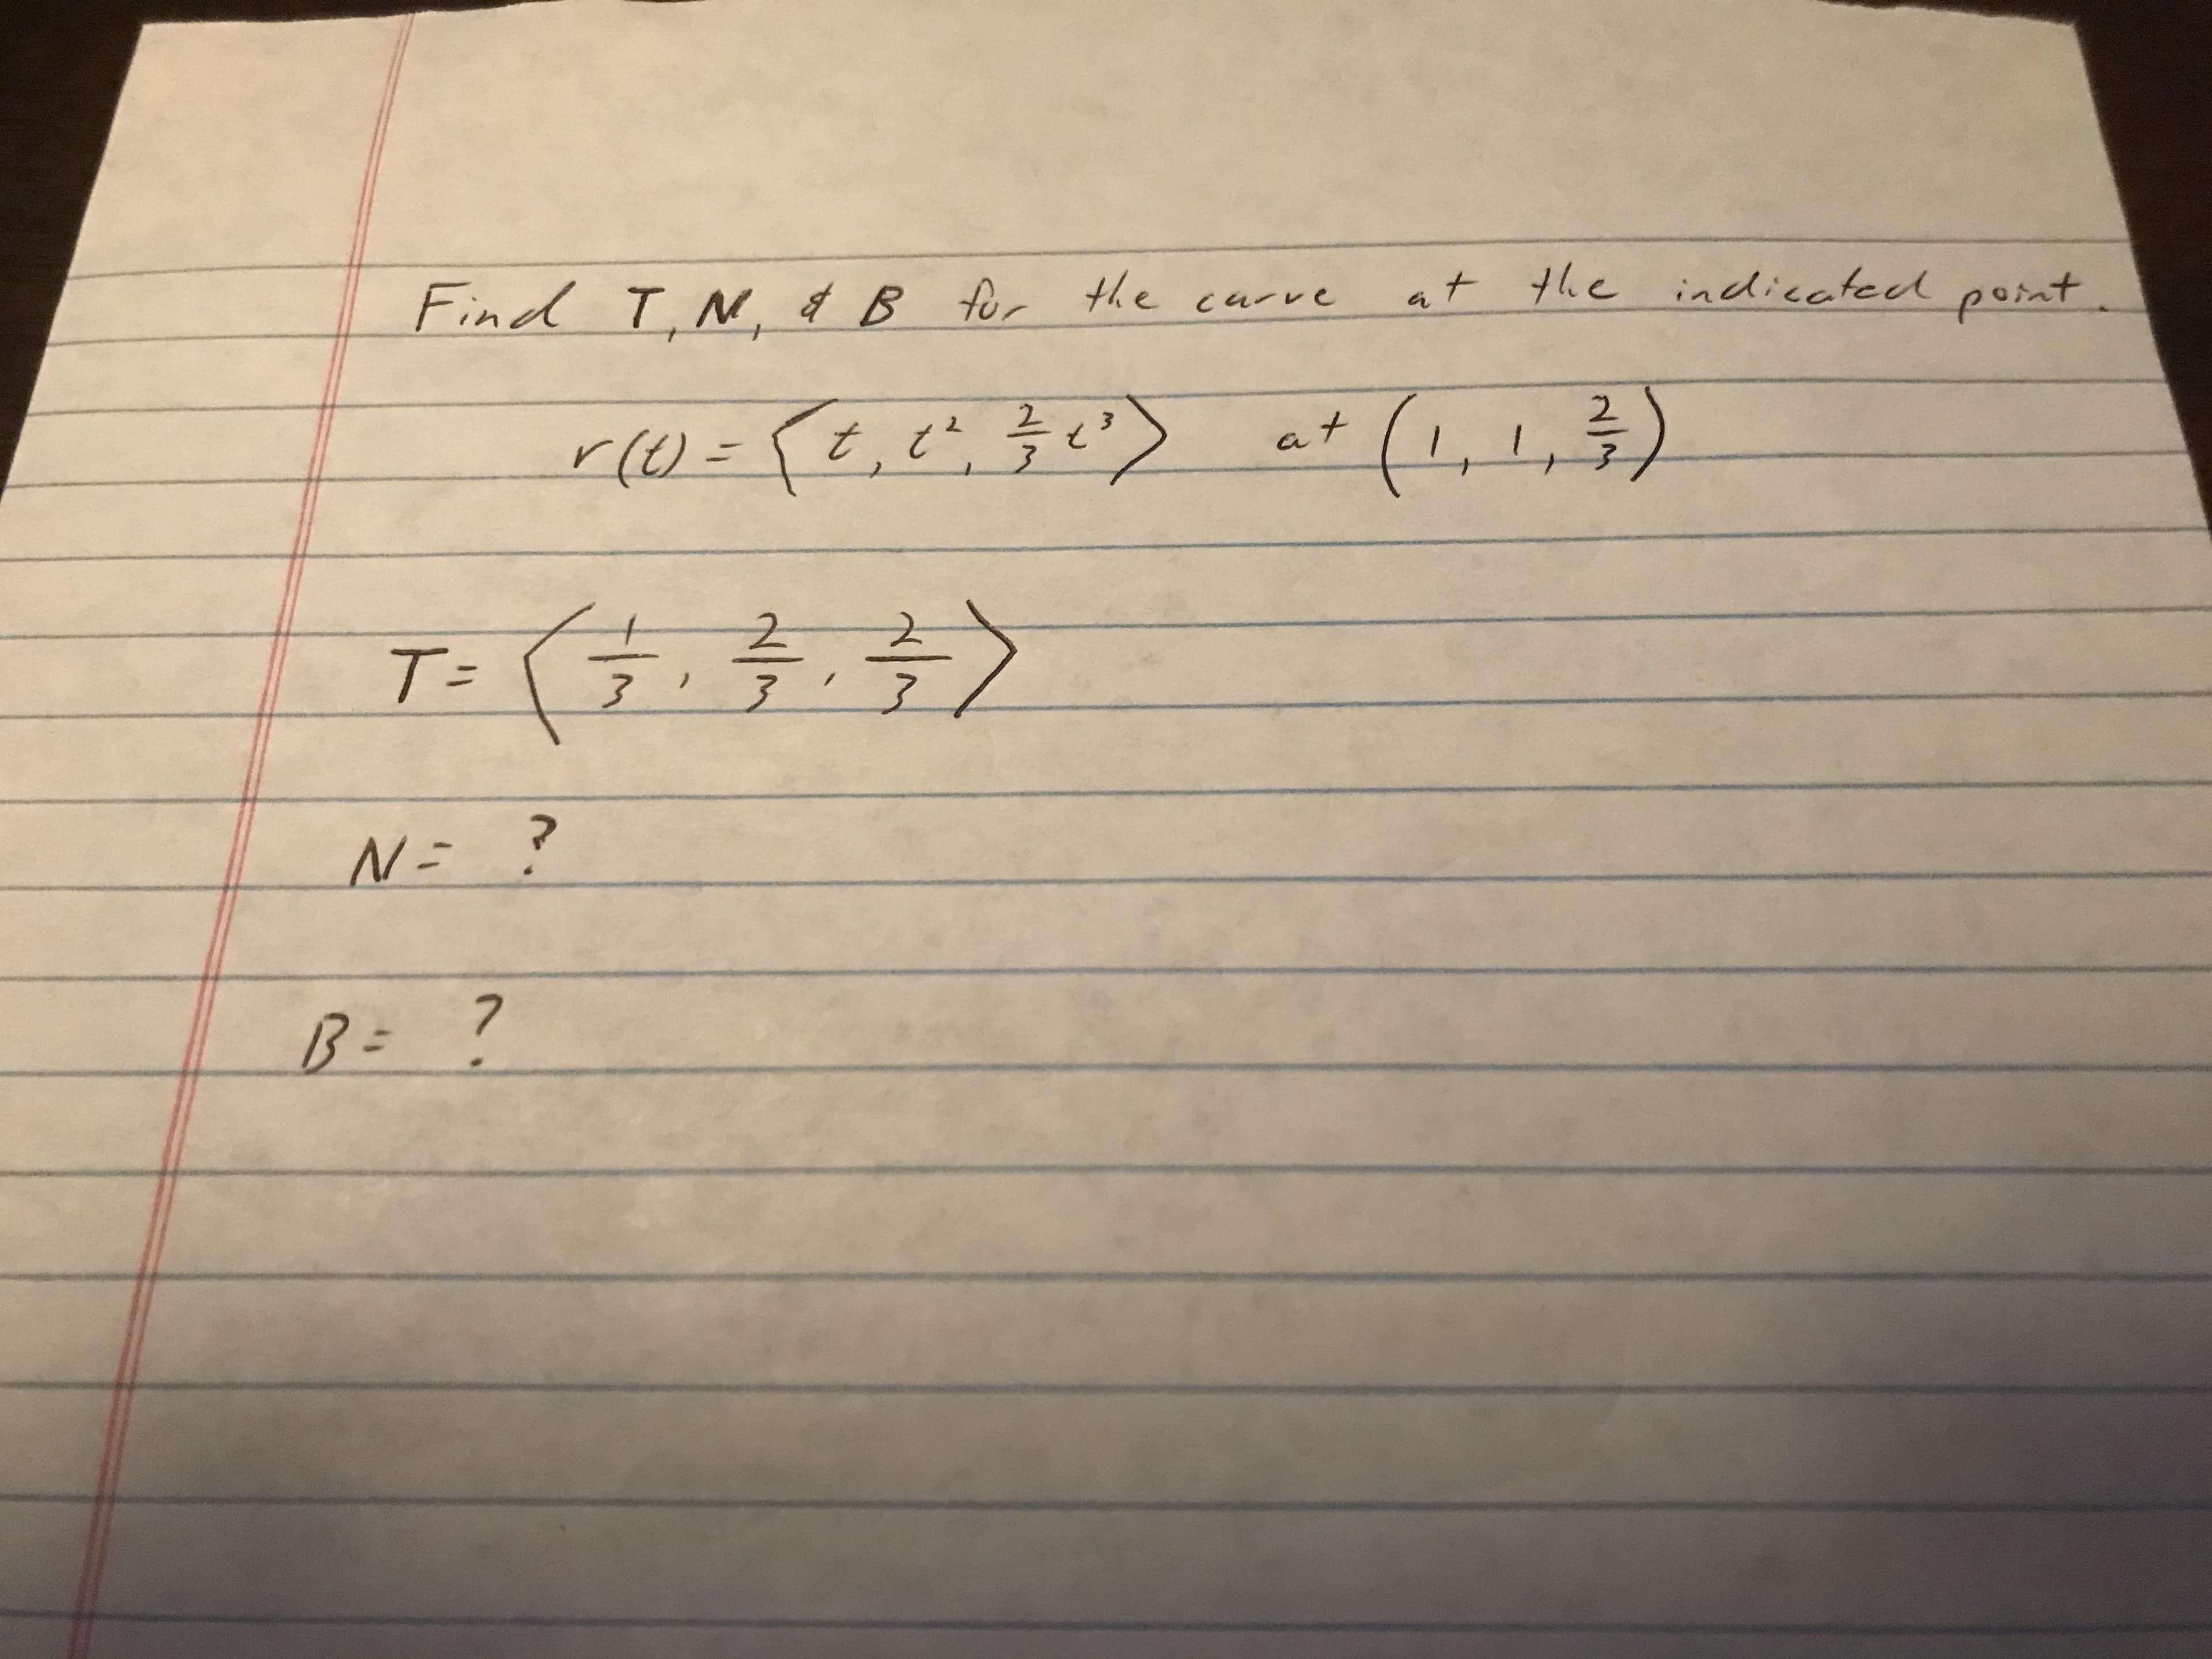 Find T N, o$ B for the carve
at the indiccted
poinat
r0=12,c号ど)
(1,!,})
at
3.
3.
